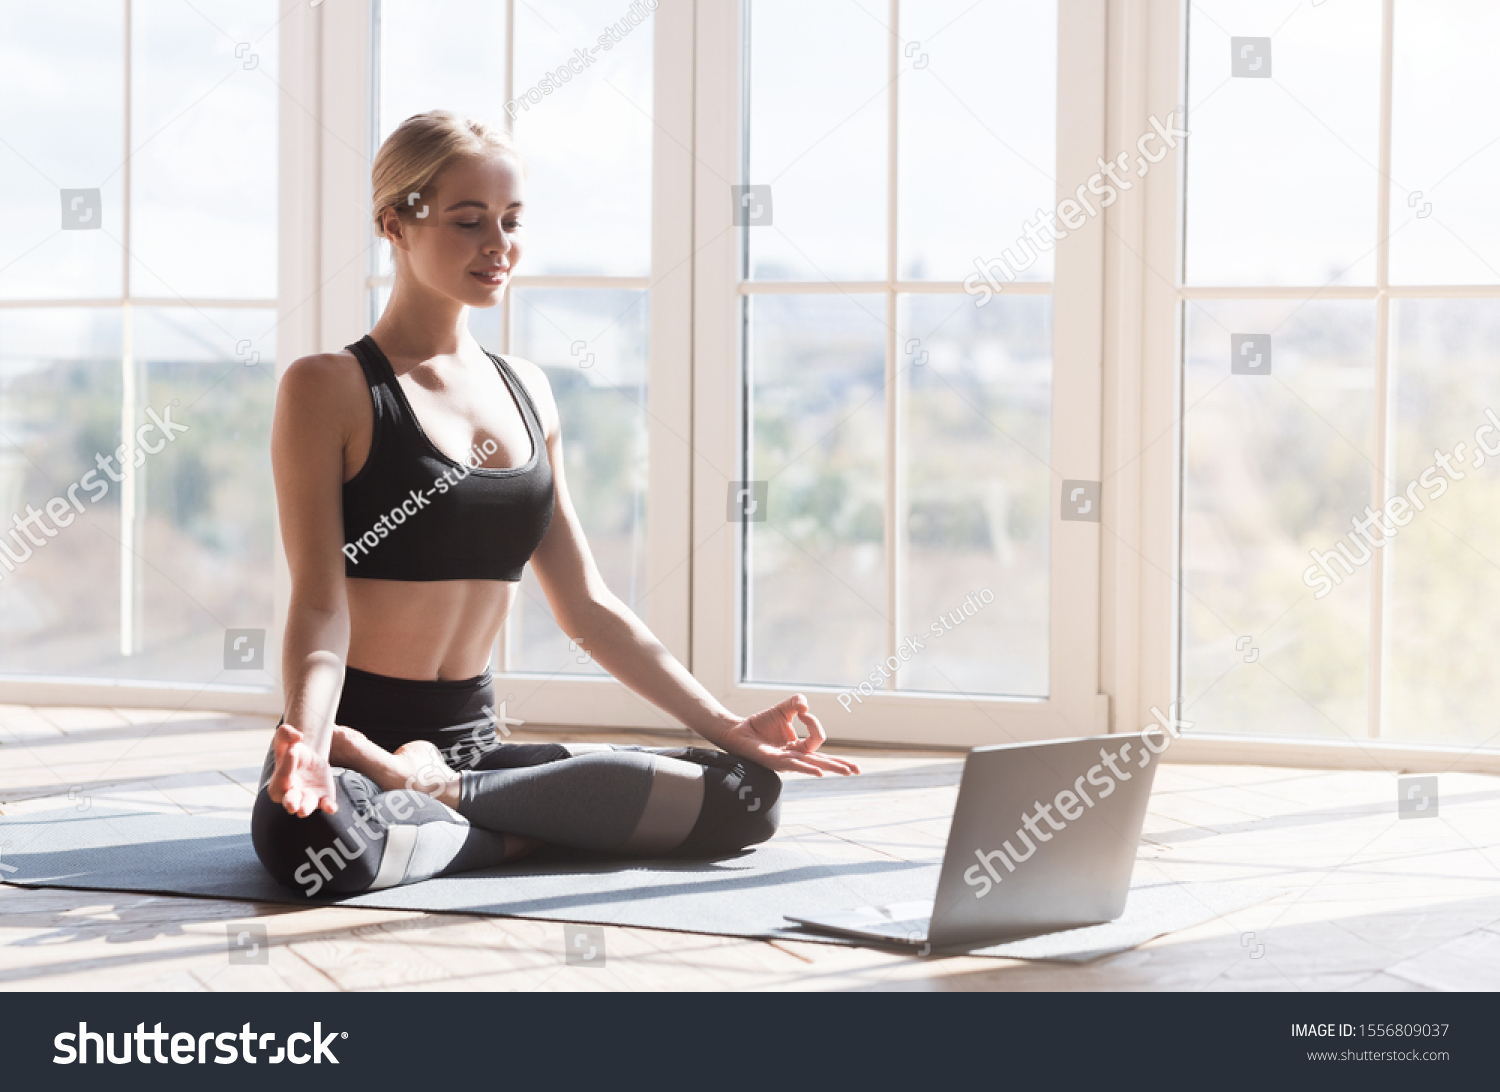 Sport application, website. Cheerful young woman practicing yoga at home, using laptop, copy space #1556809037